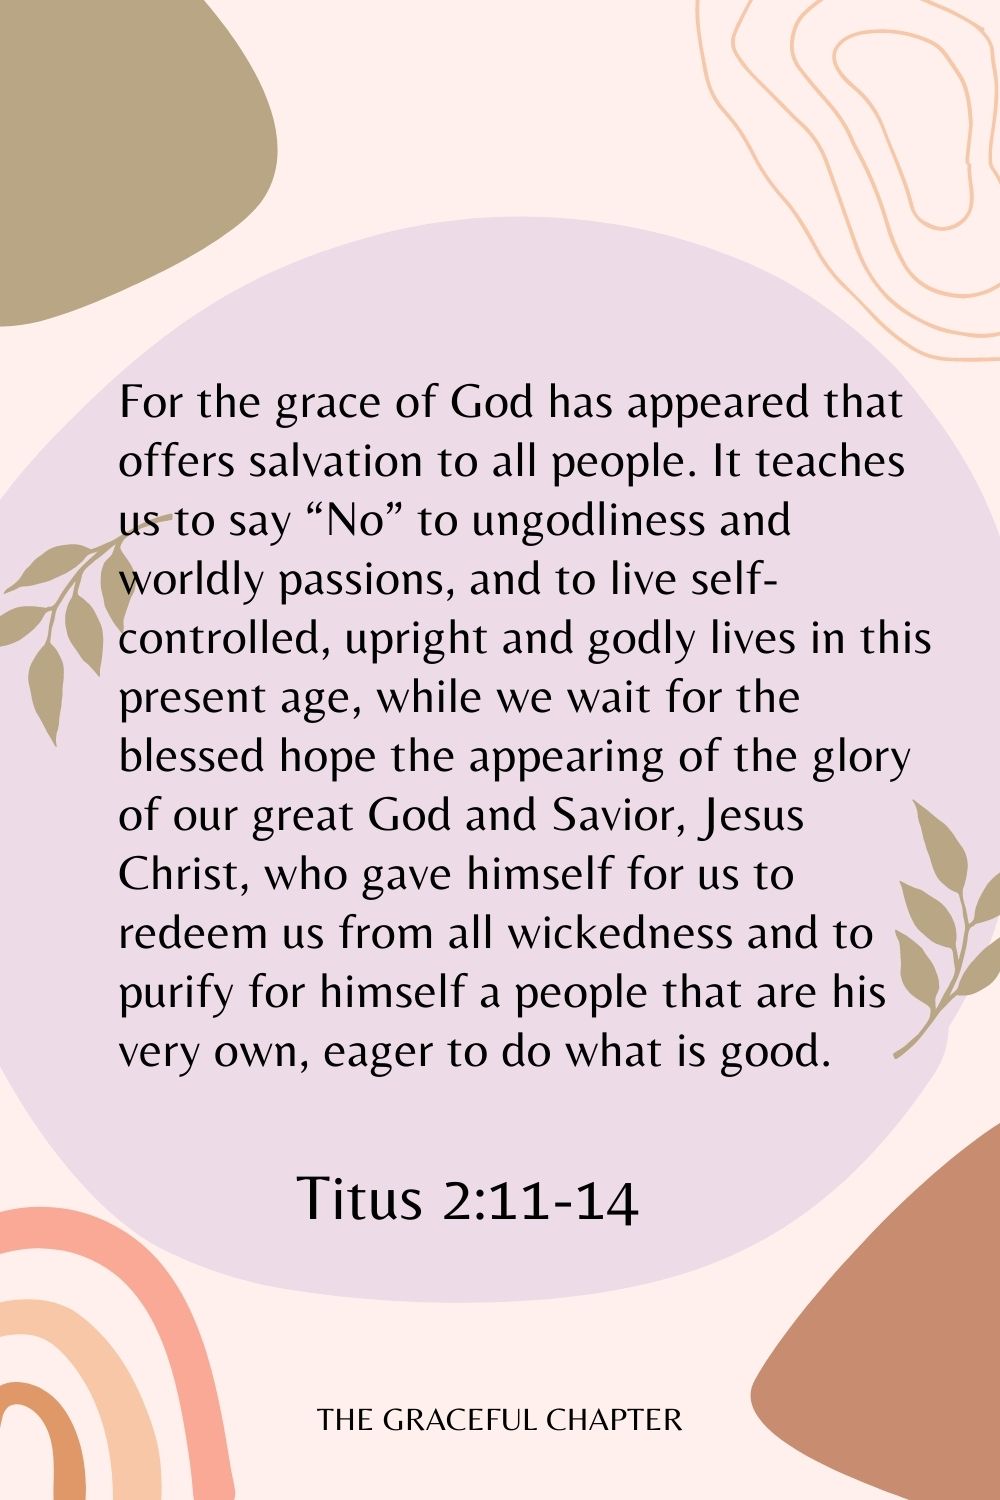 For the grace of God has appeared that offers salvation to all people. It teaches us to say “No” to ungodliness and worldly passions, and to live self-controlled, upright and godly lives in this present age, while we wait for the blessed hope the appearing of the glory of our great God and Savior, Jesus Christ, who gave himself for us to redeem us from all wickedness and to purify for himself a people that are his very own, eager to do what is good. Titus 2:11-14